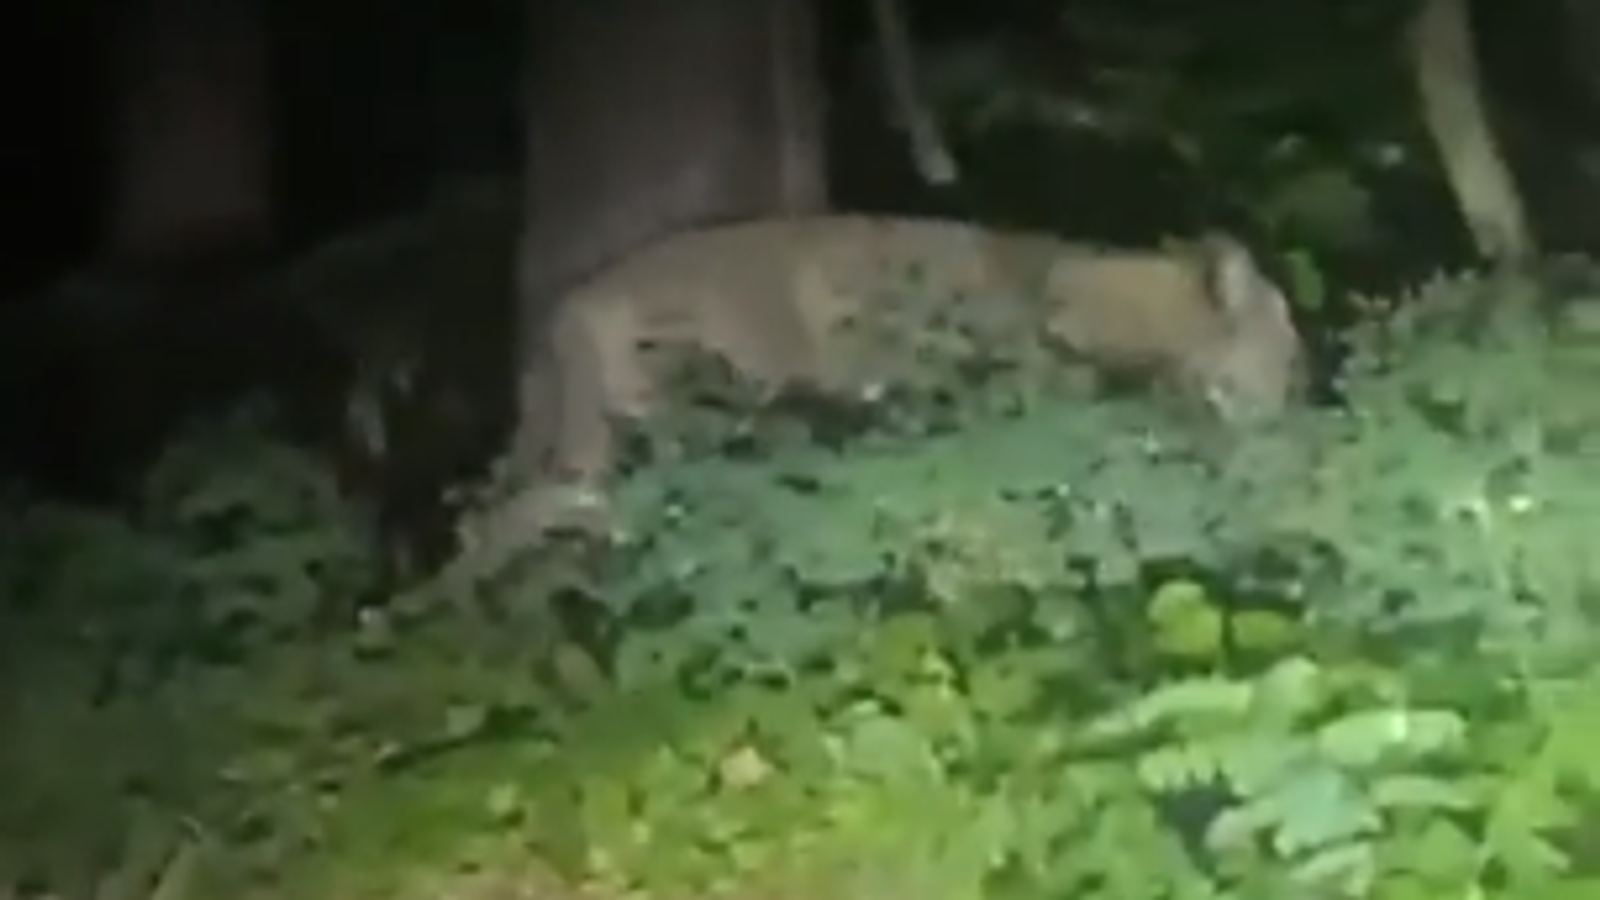 The 'lioness' on the loose in Berlin isn't what we first thought